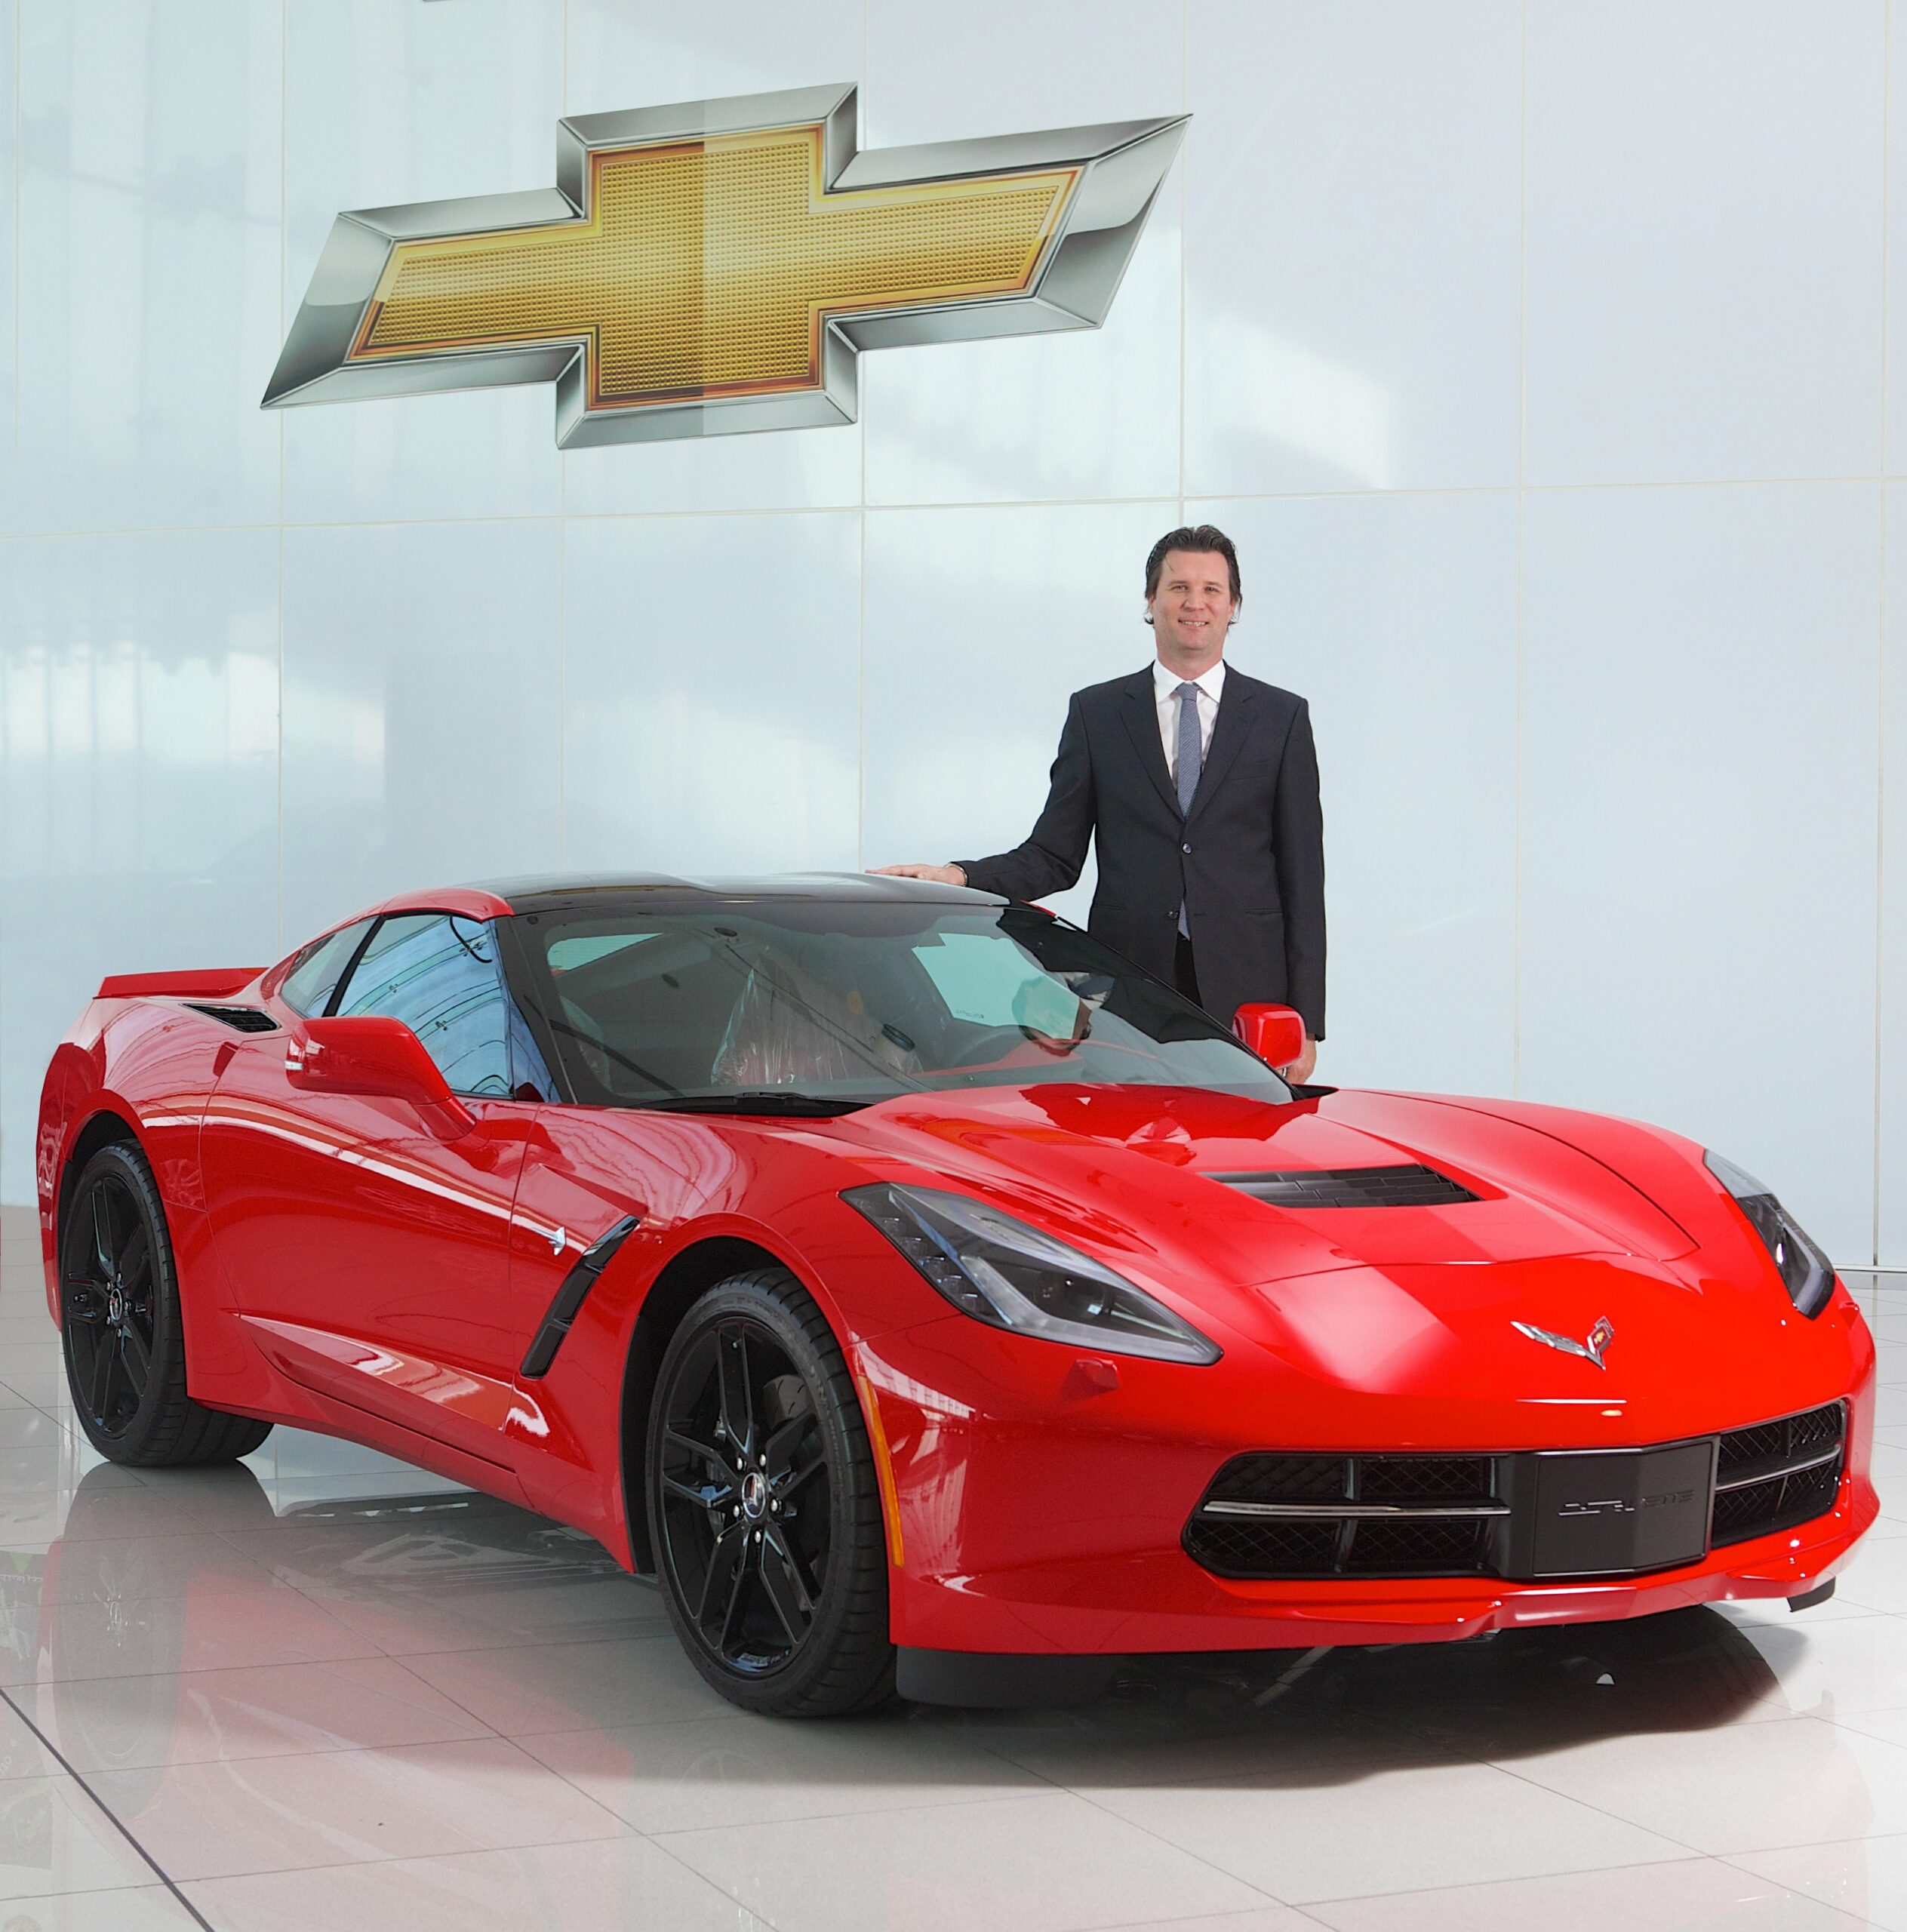 What Makes a Corvette Different From Other Muscle Cars?